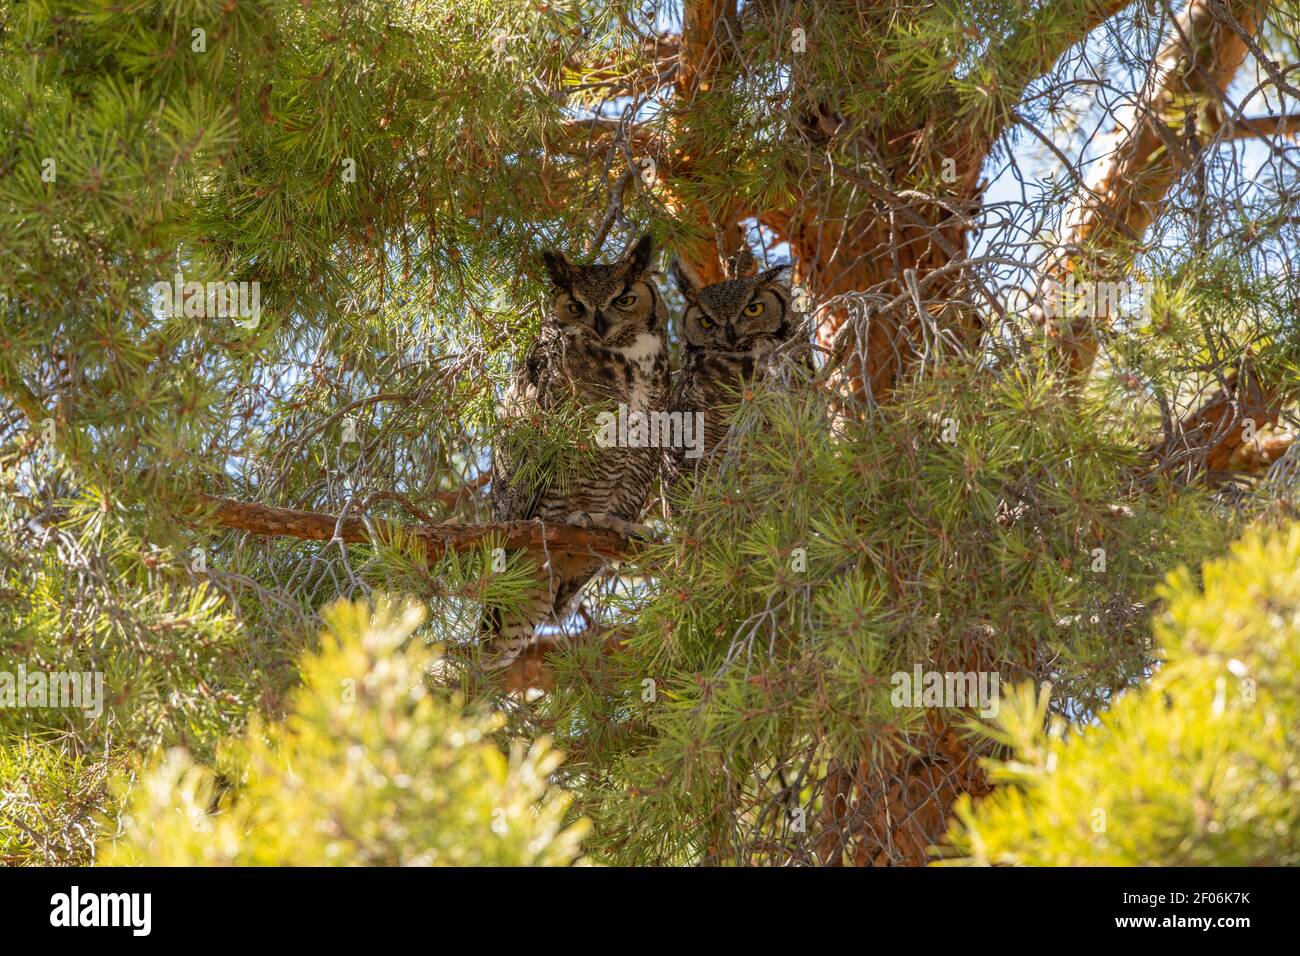 Great horned owl pair in pine tree Stock Photo